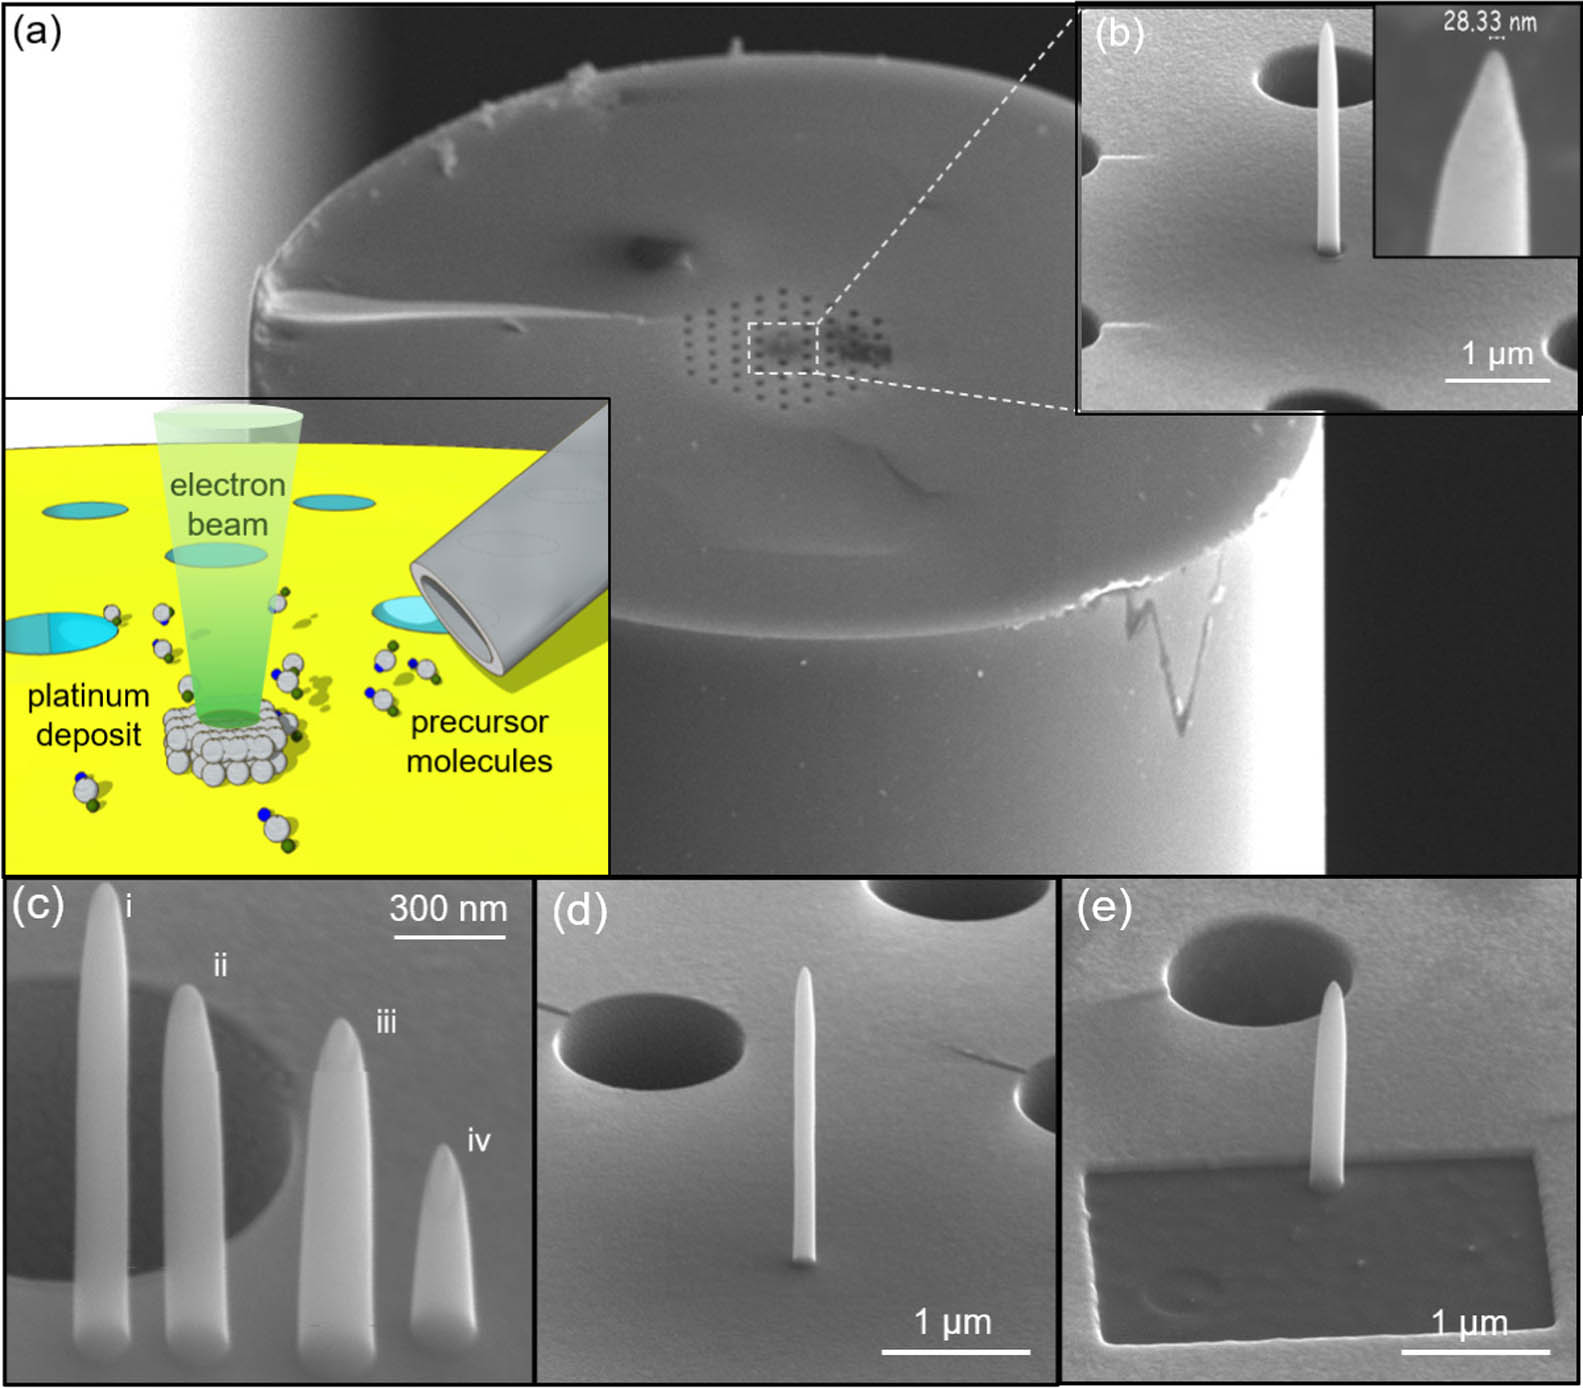 Device fabrication with electron-beam-induced deposition (EBID). (a) Schematics of the EBID process and overview SEM image of PCF. (b)–(e) SEM images of the fabricated samples on PCFs taken at 52 degrees inclination. The deposition parameters, base diameter, and height of each tip are tabulated in the Methods section.